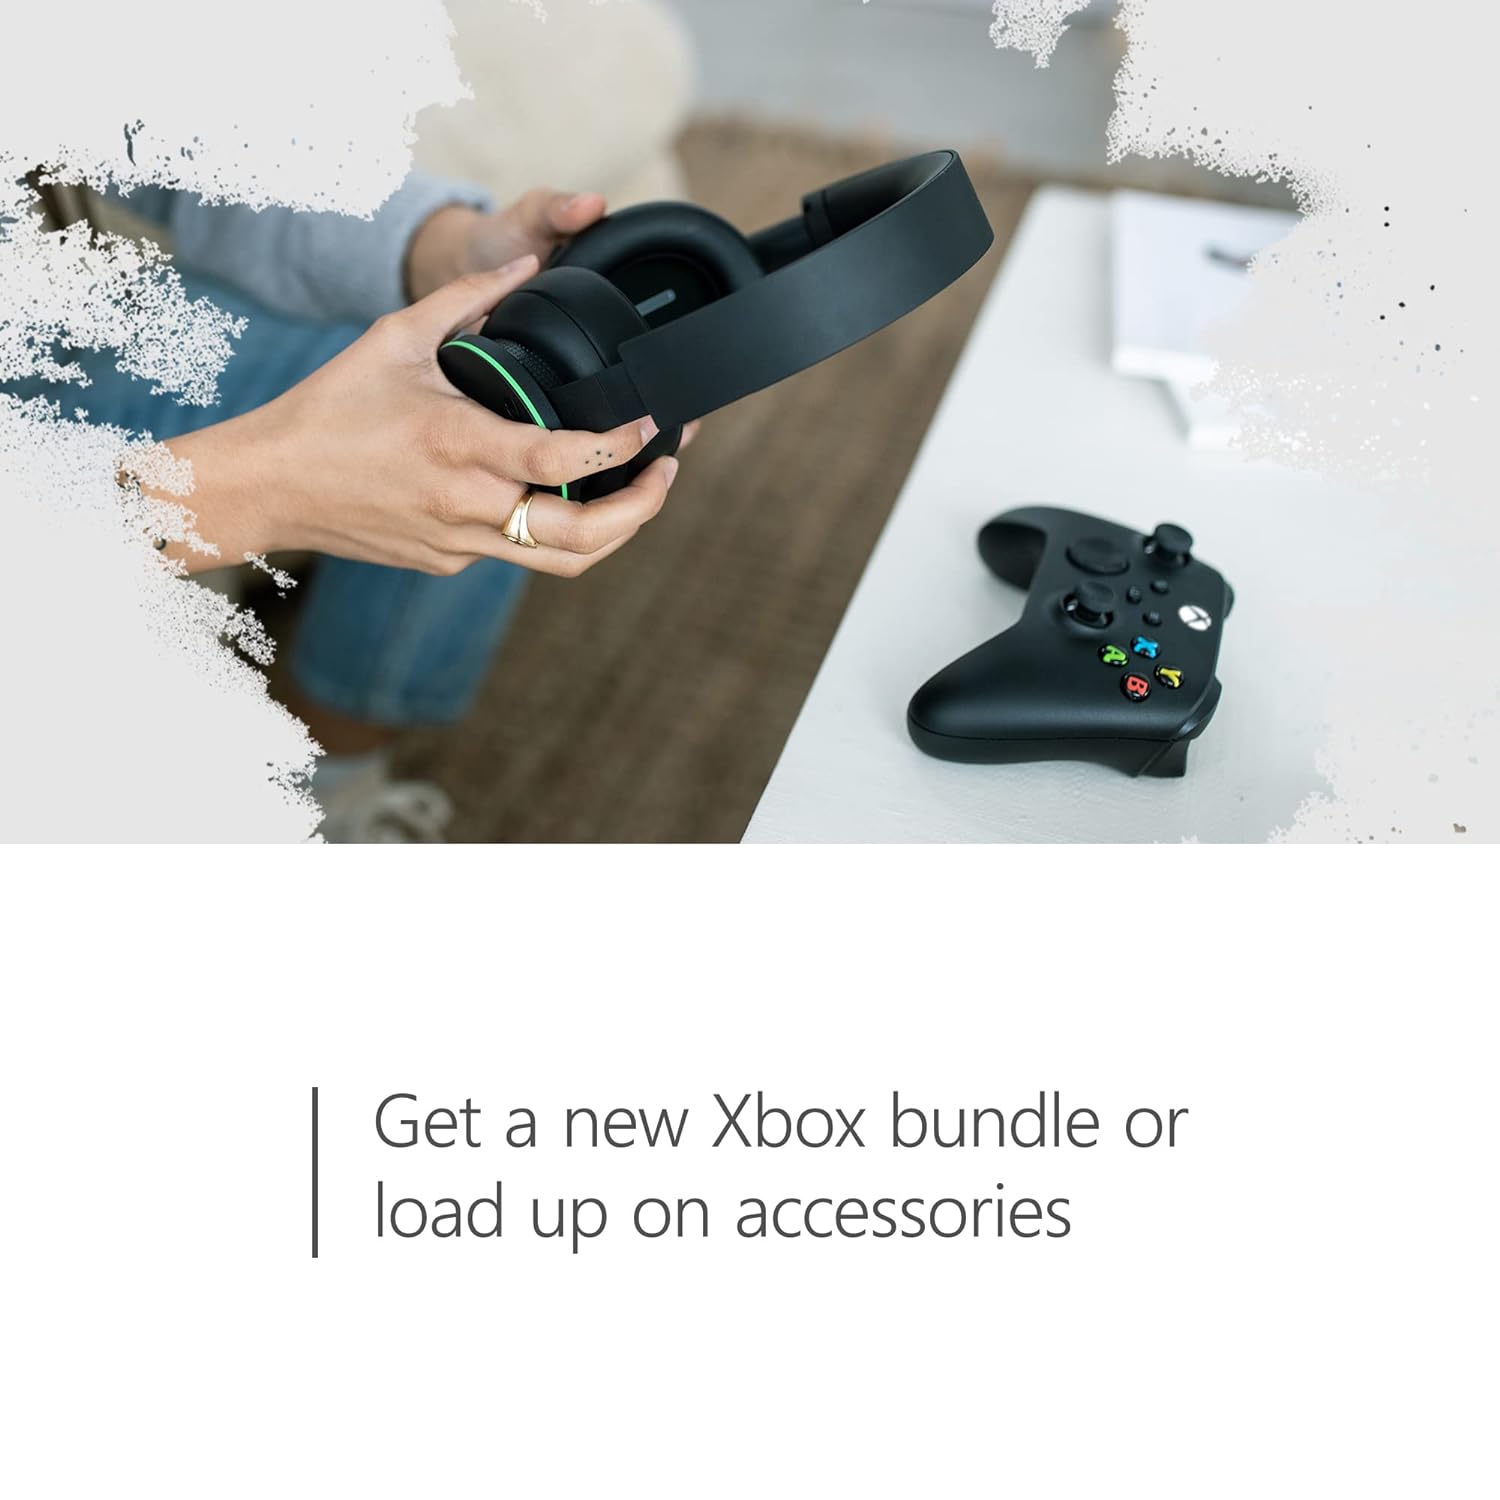 $20 Xbox Digital Gift Card | Get a new Xbox bundle or load up on accessories.